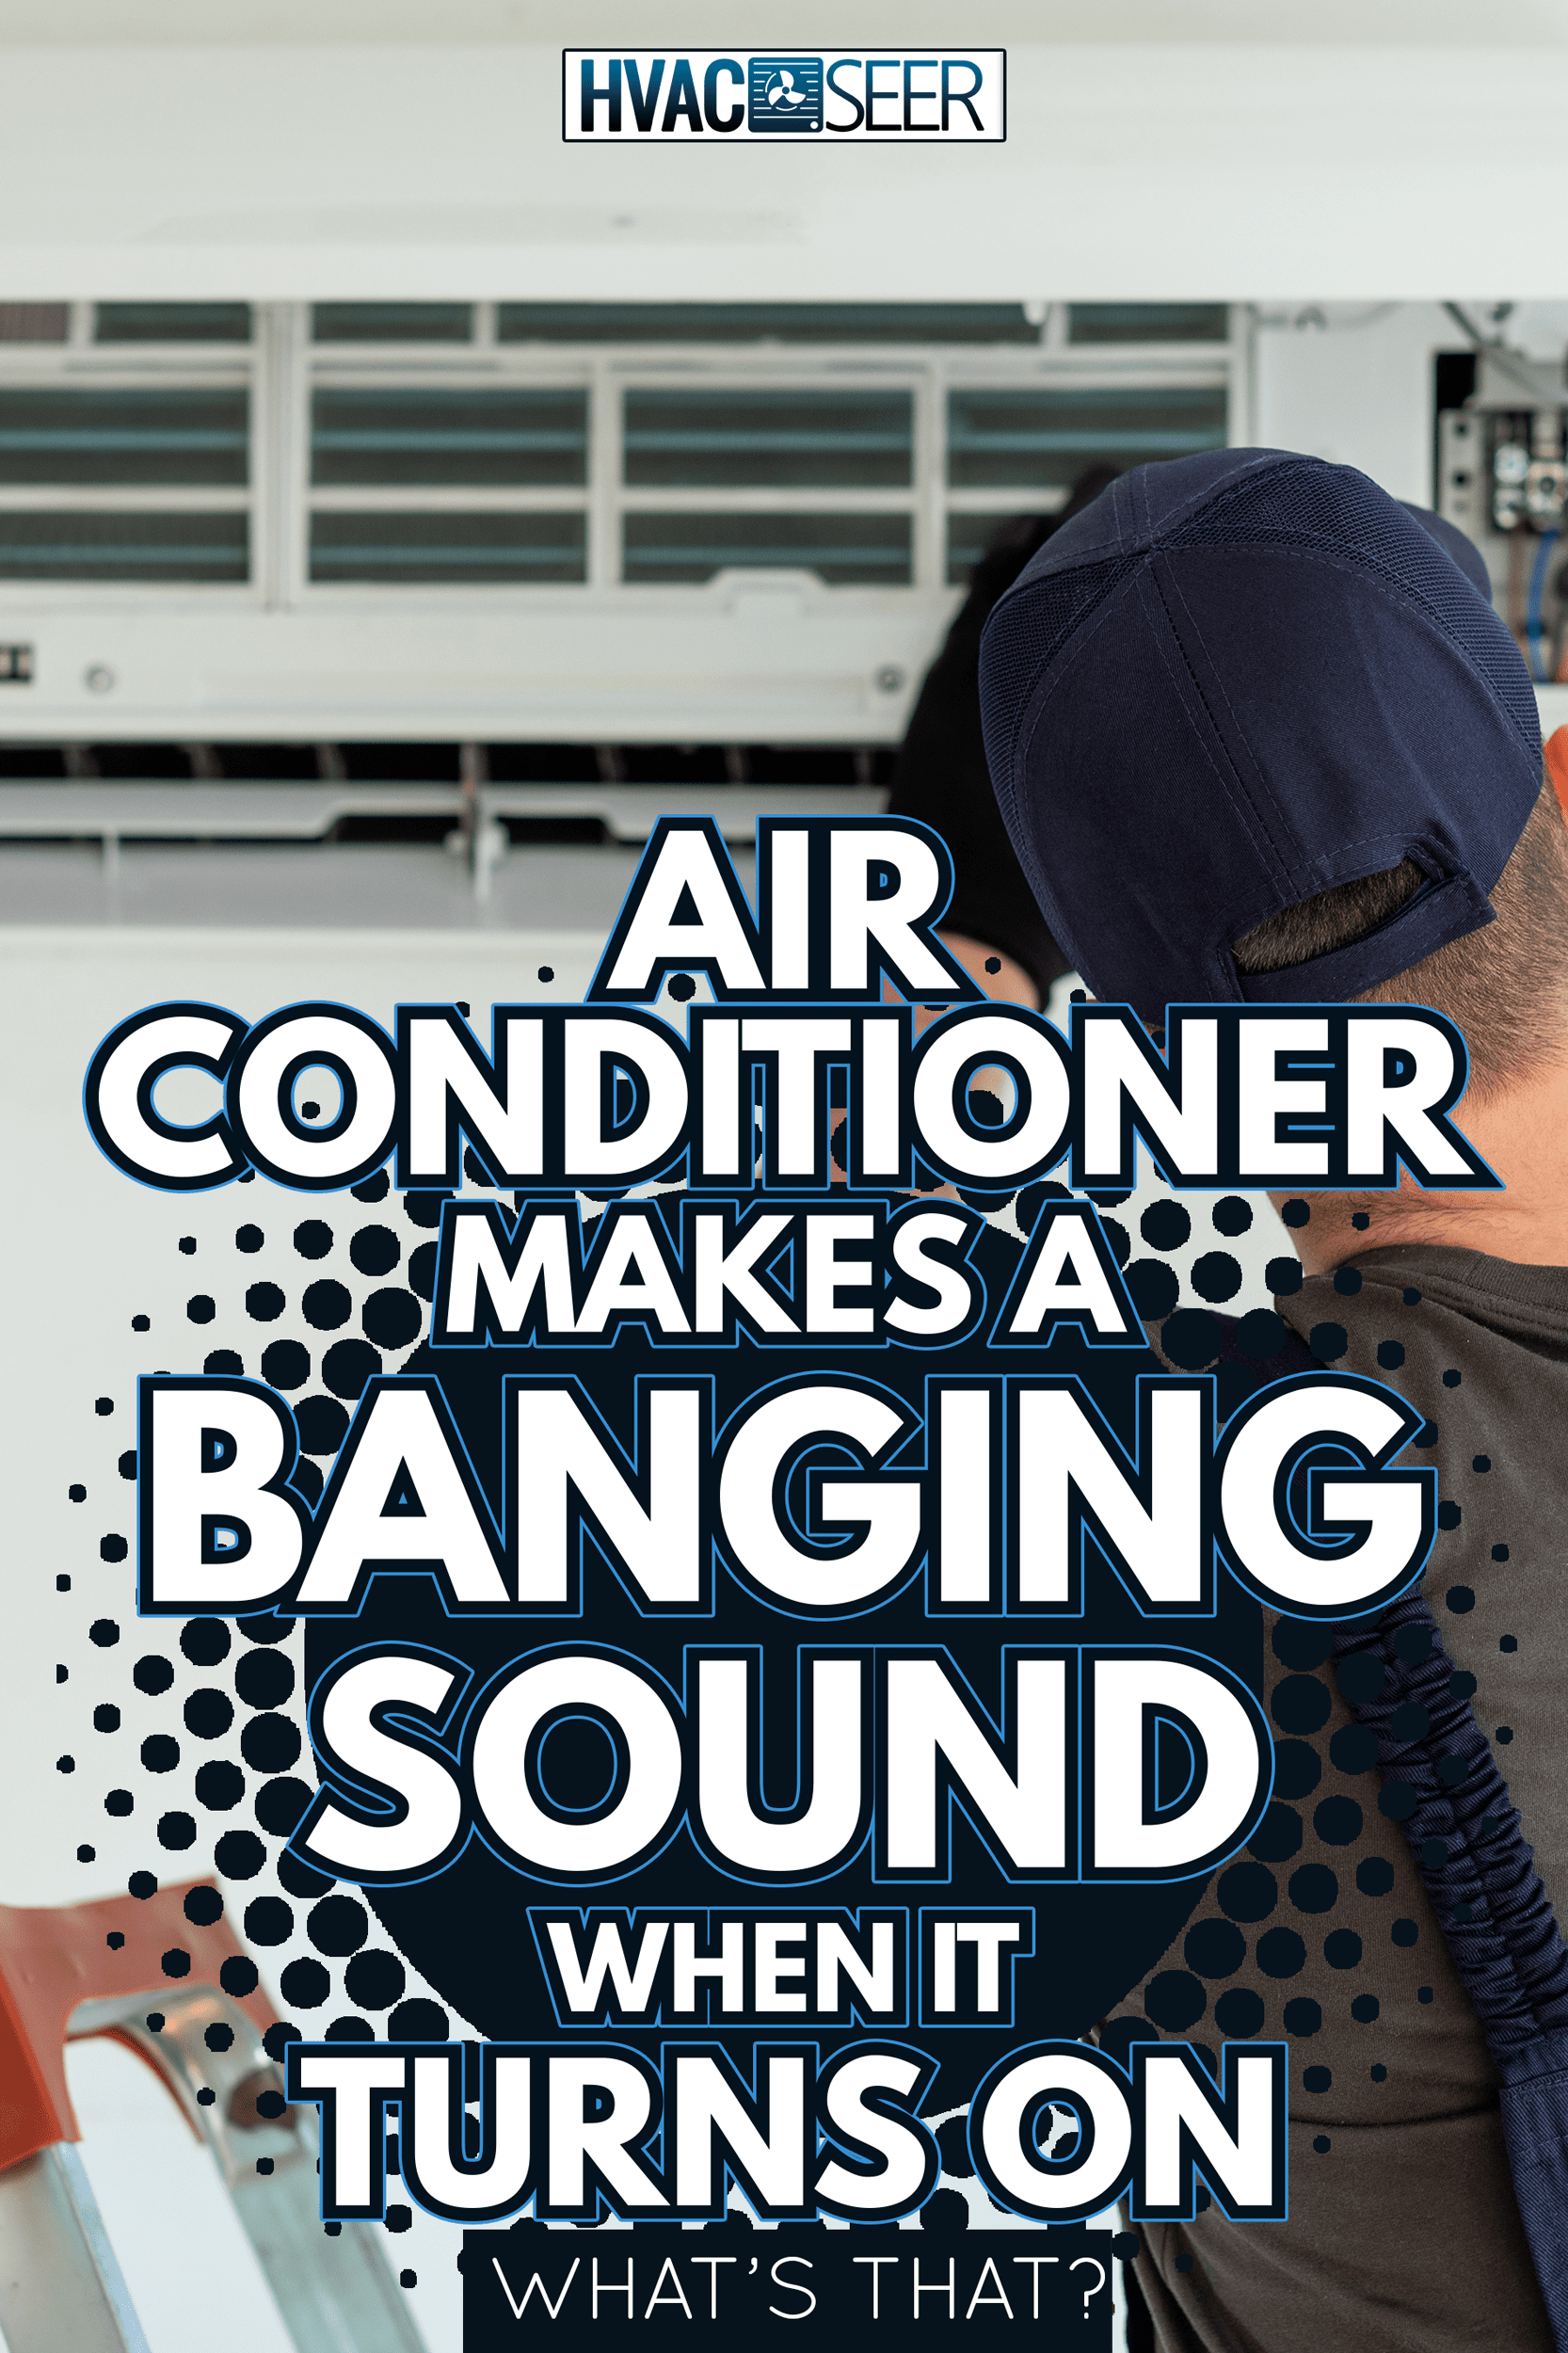 Technician repairing air conditioner - Air Conditioner Makes a Banging Sound When It Turns On - What's That